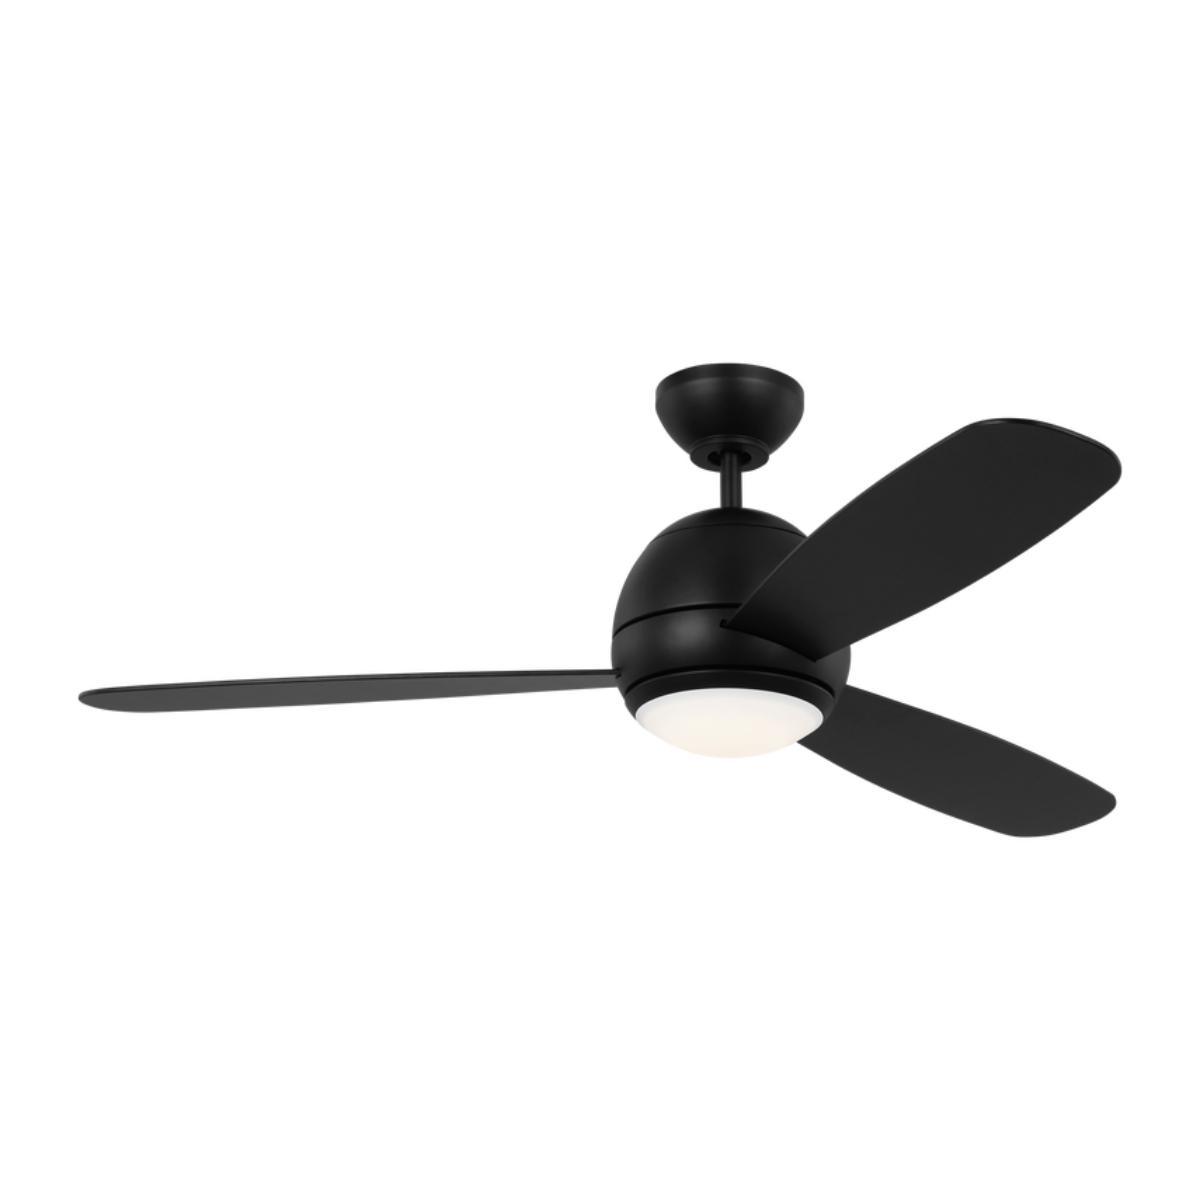 Orbis 52 Inch LED Ceiling Fan With Wall Control